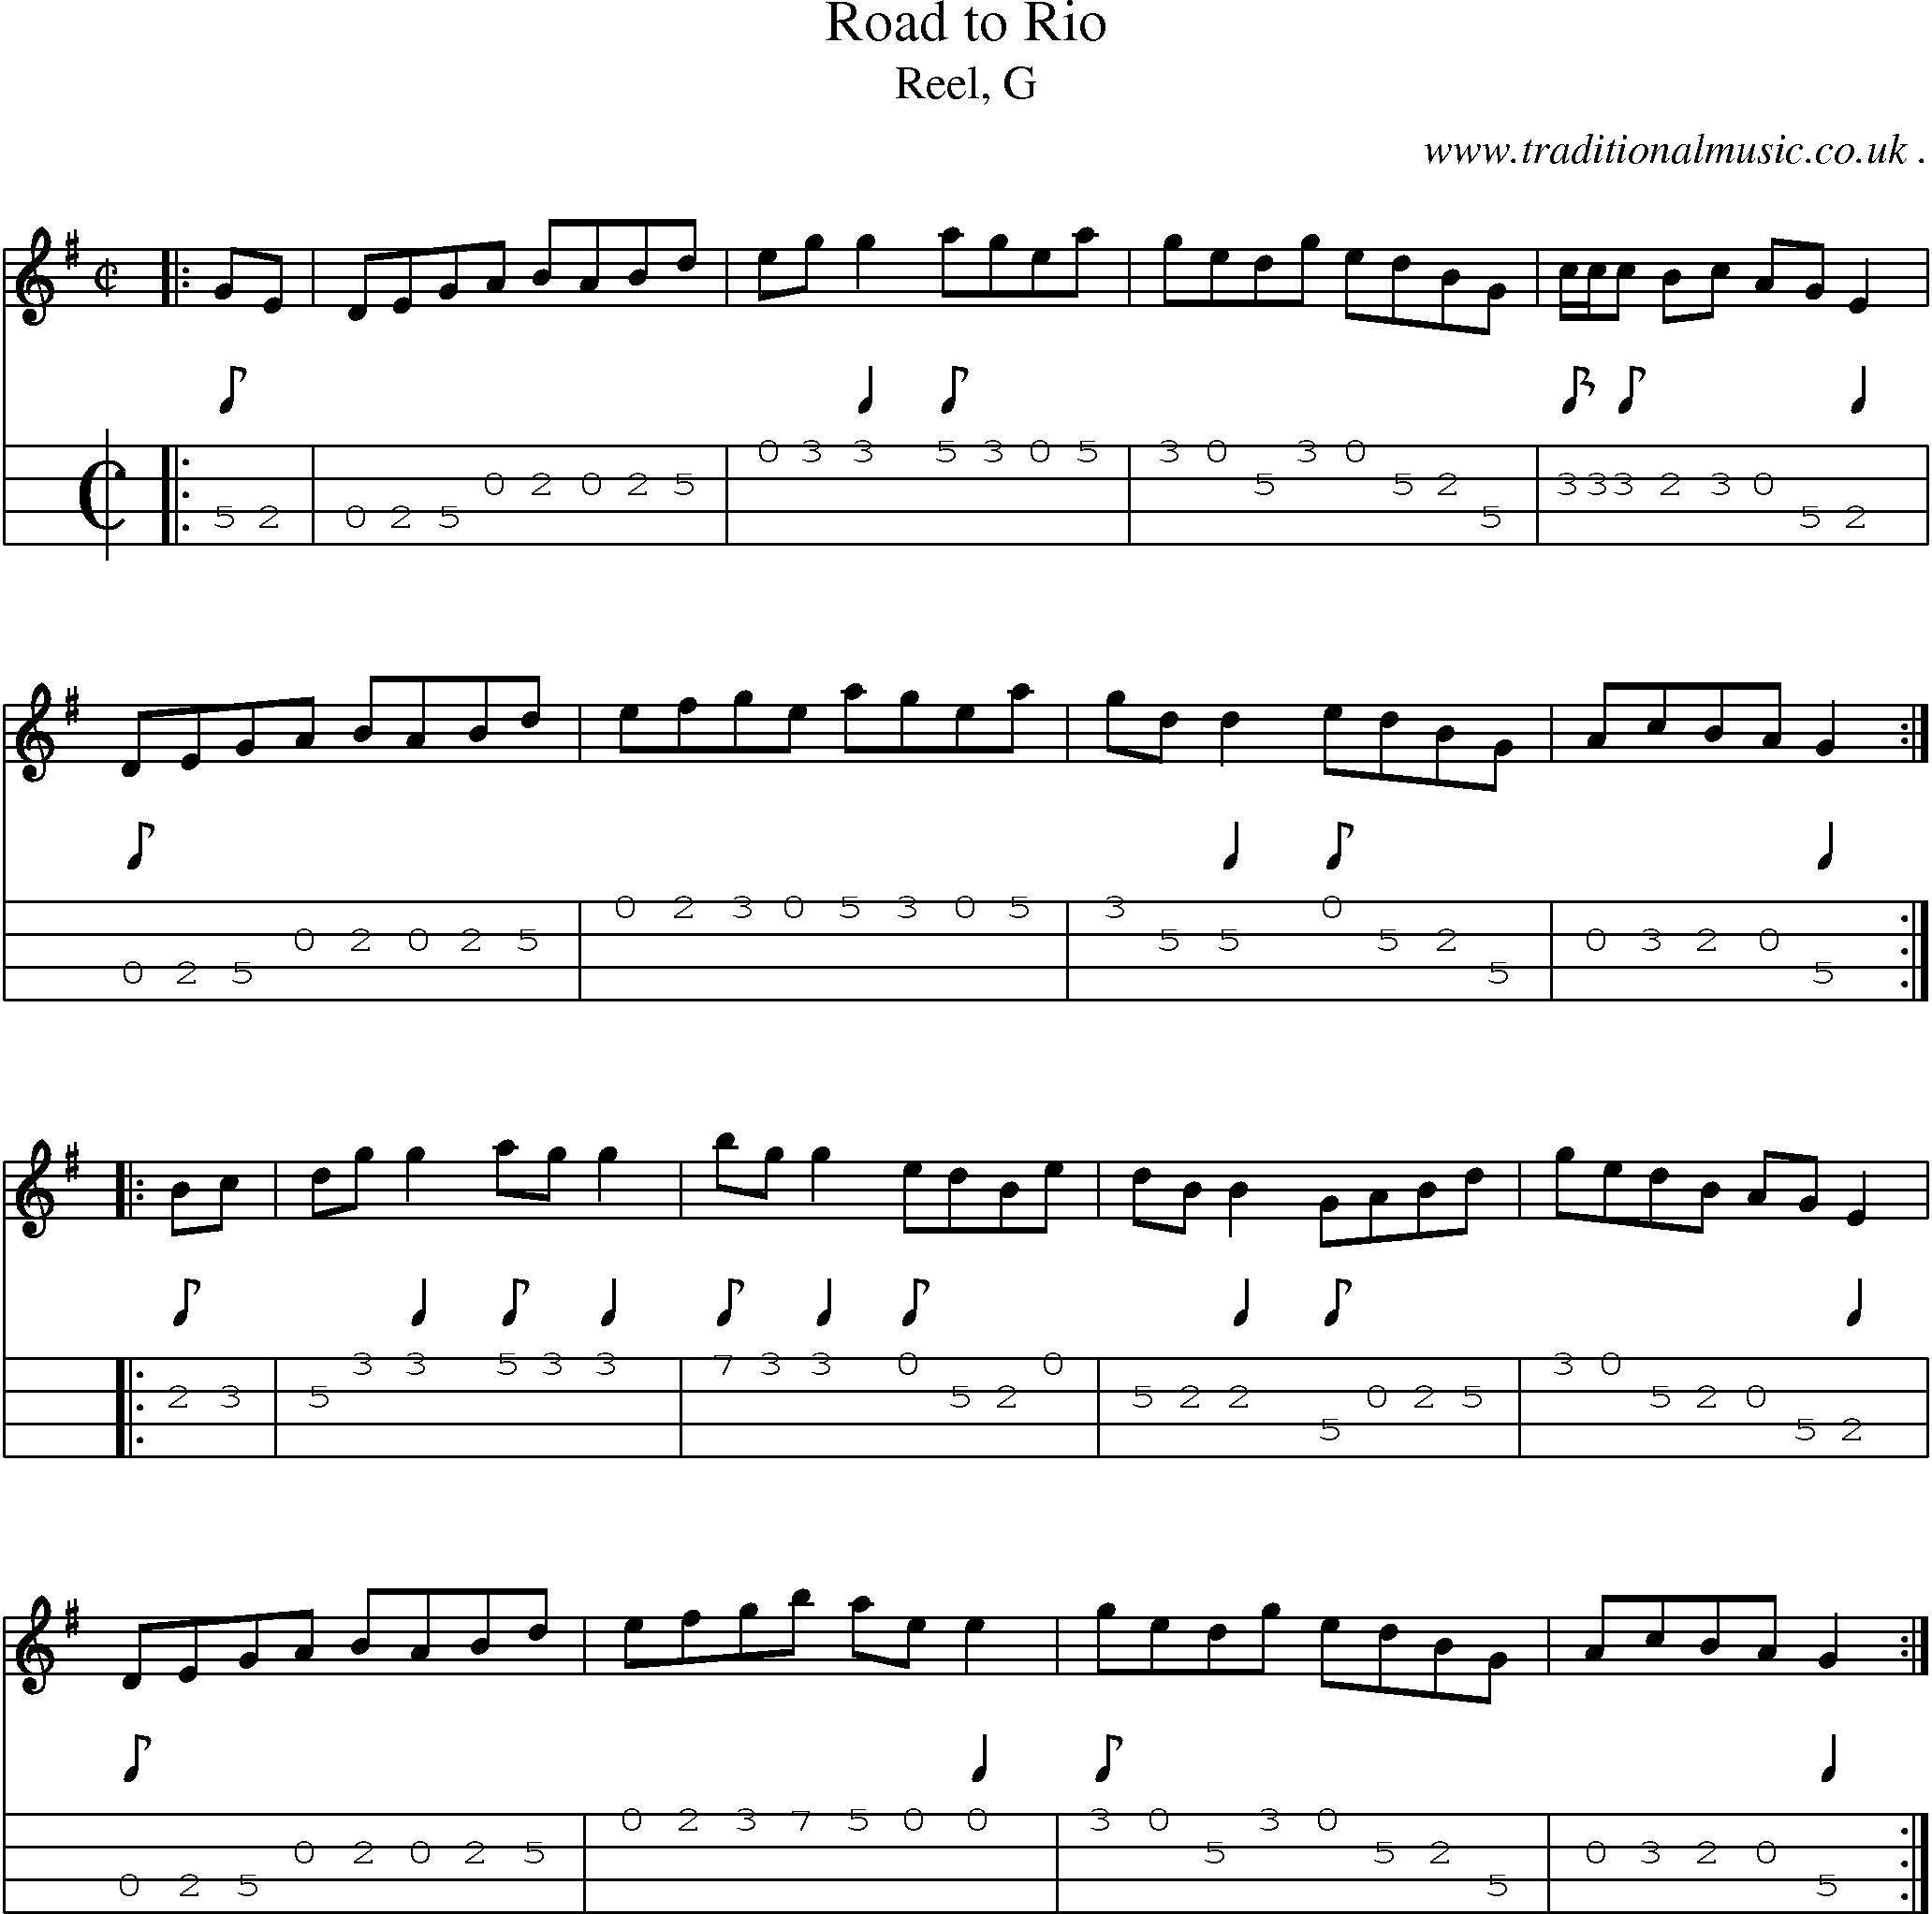 Sheet-music  score, Chords and Mandolin Tabs for Road To Rio